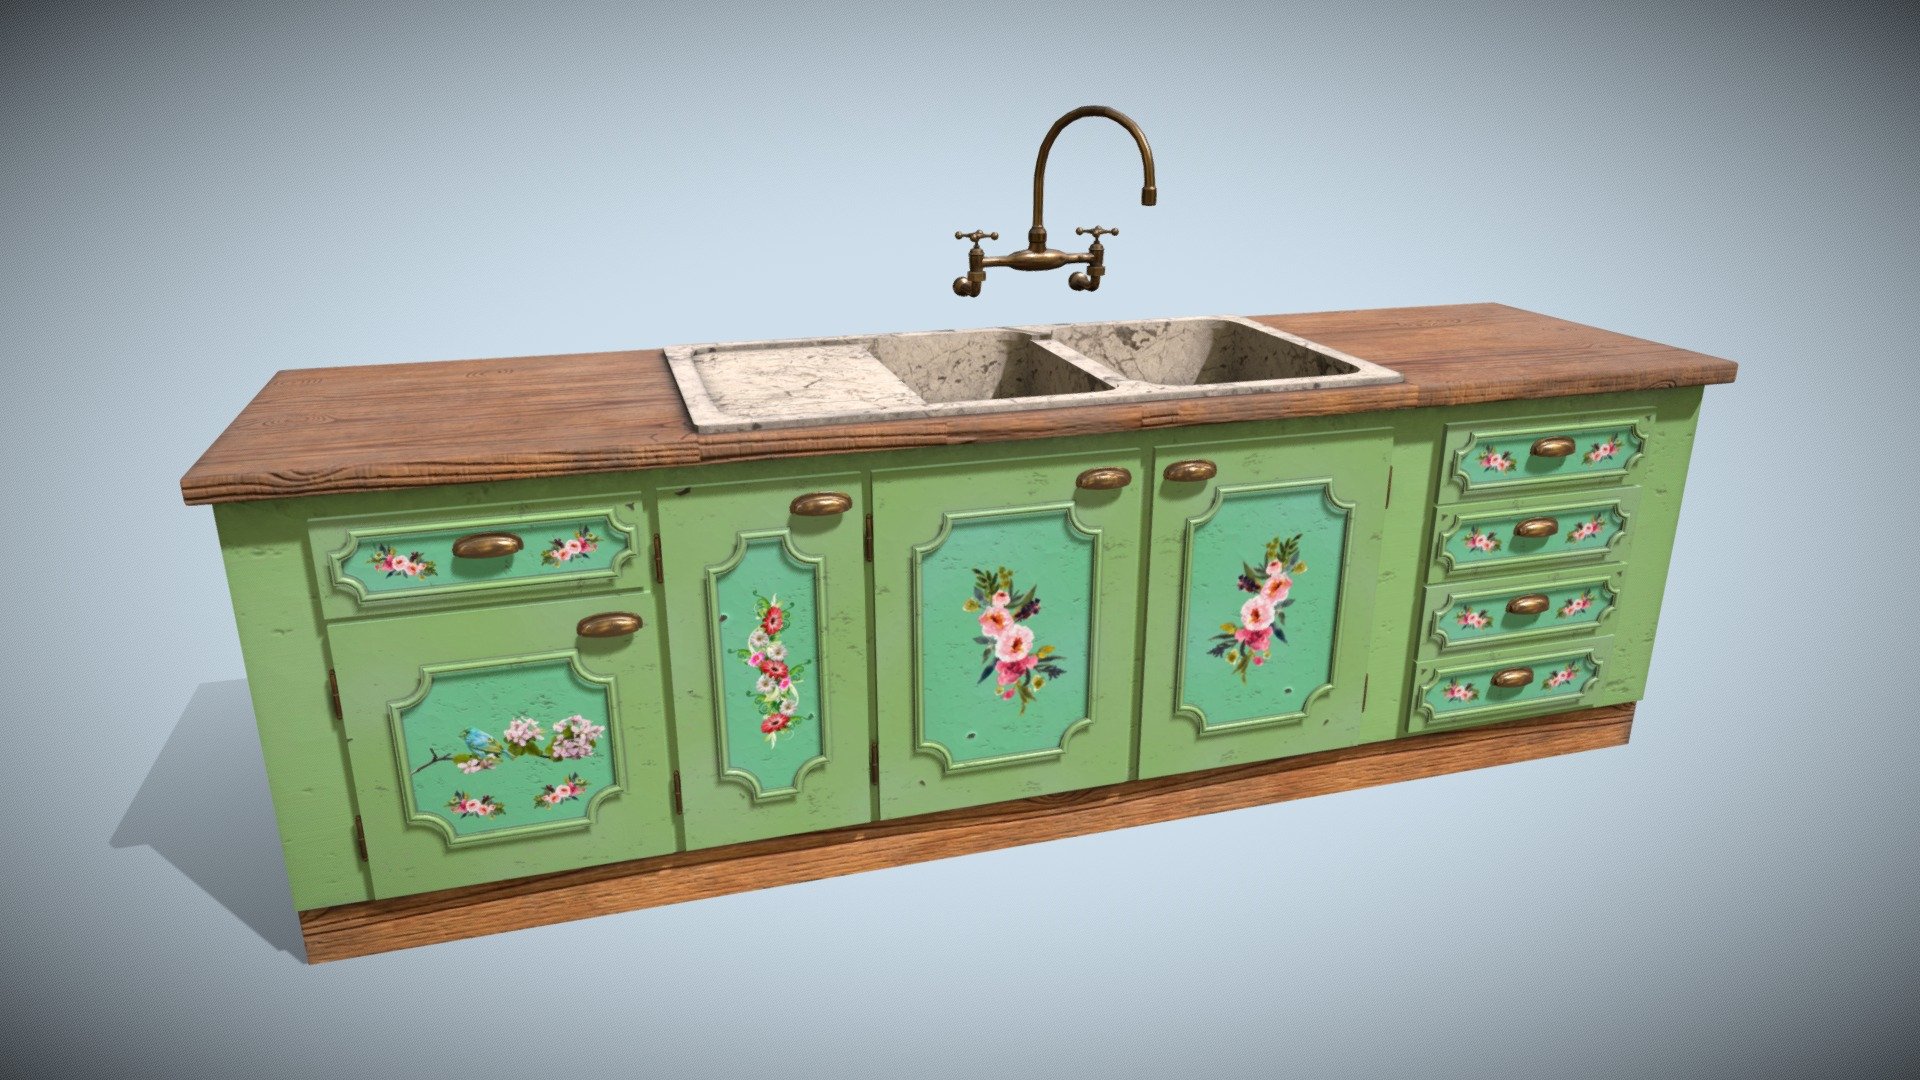 Realistic kitchen furniture with few polygons good to use in games and etc.
Textures in PBR size 2048.
All separate animations of opening and closing doors and drawers.
Additional downloads include more fbx obj and dae formats.
One more model the same without being animated 3d model